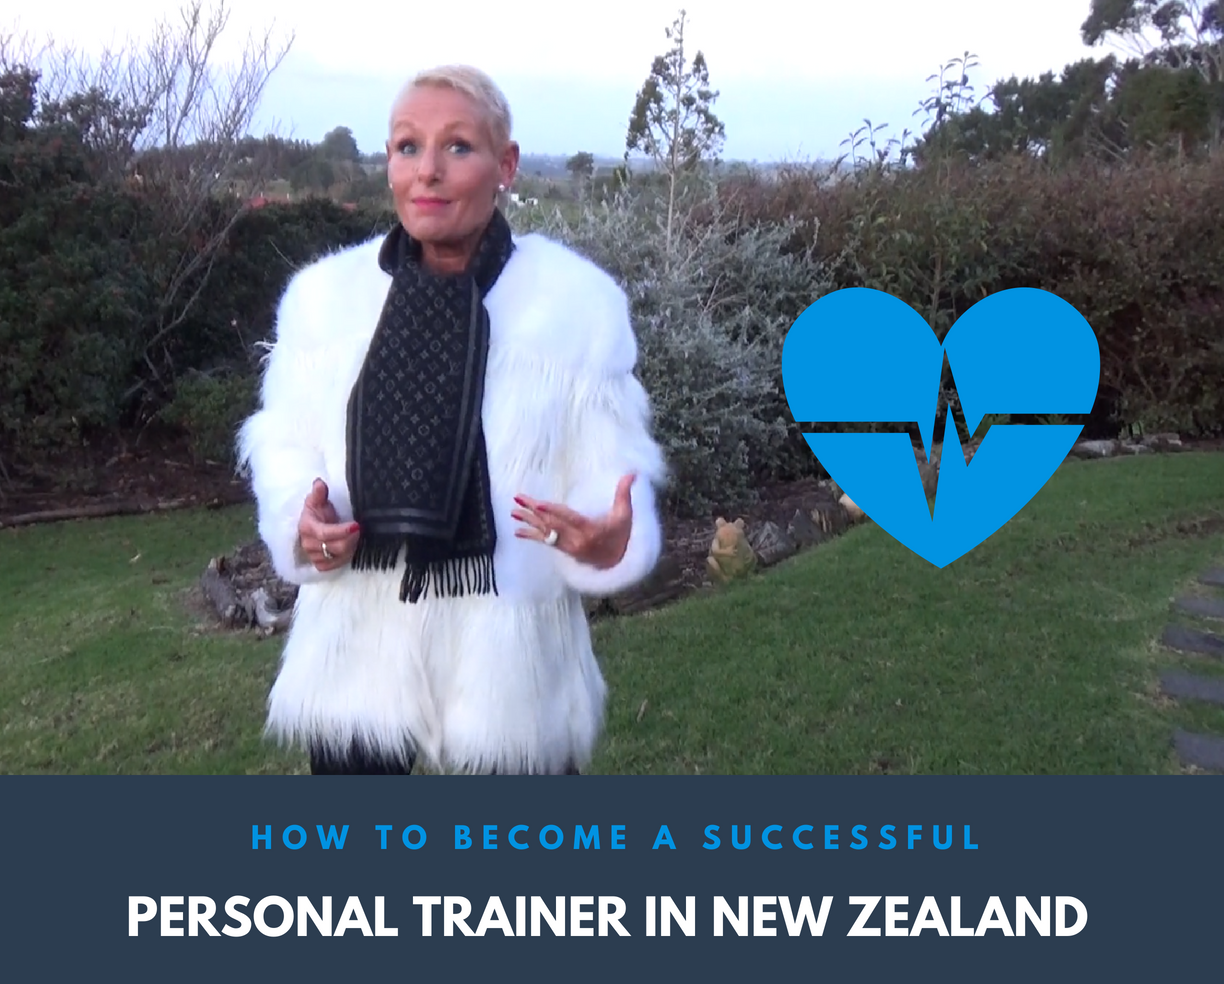 Online Personal Training Course in Auckland & New Zealand